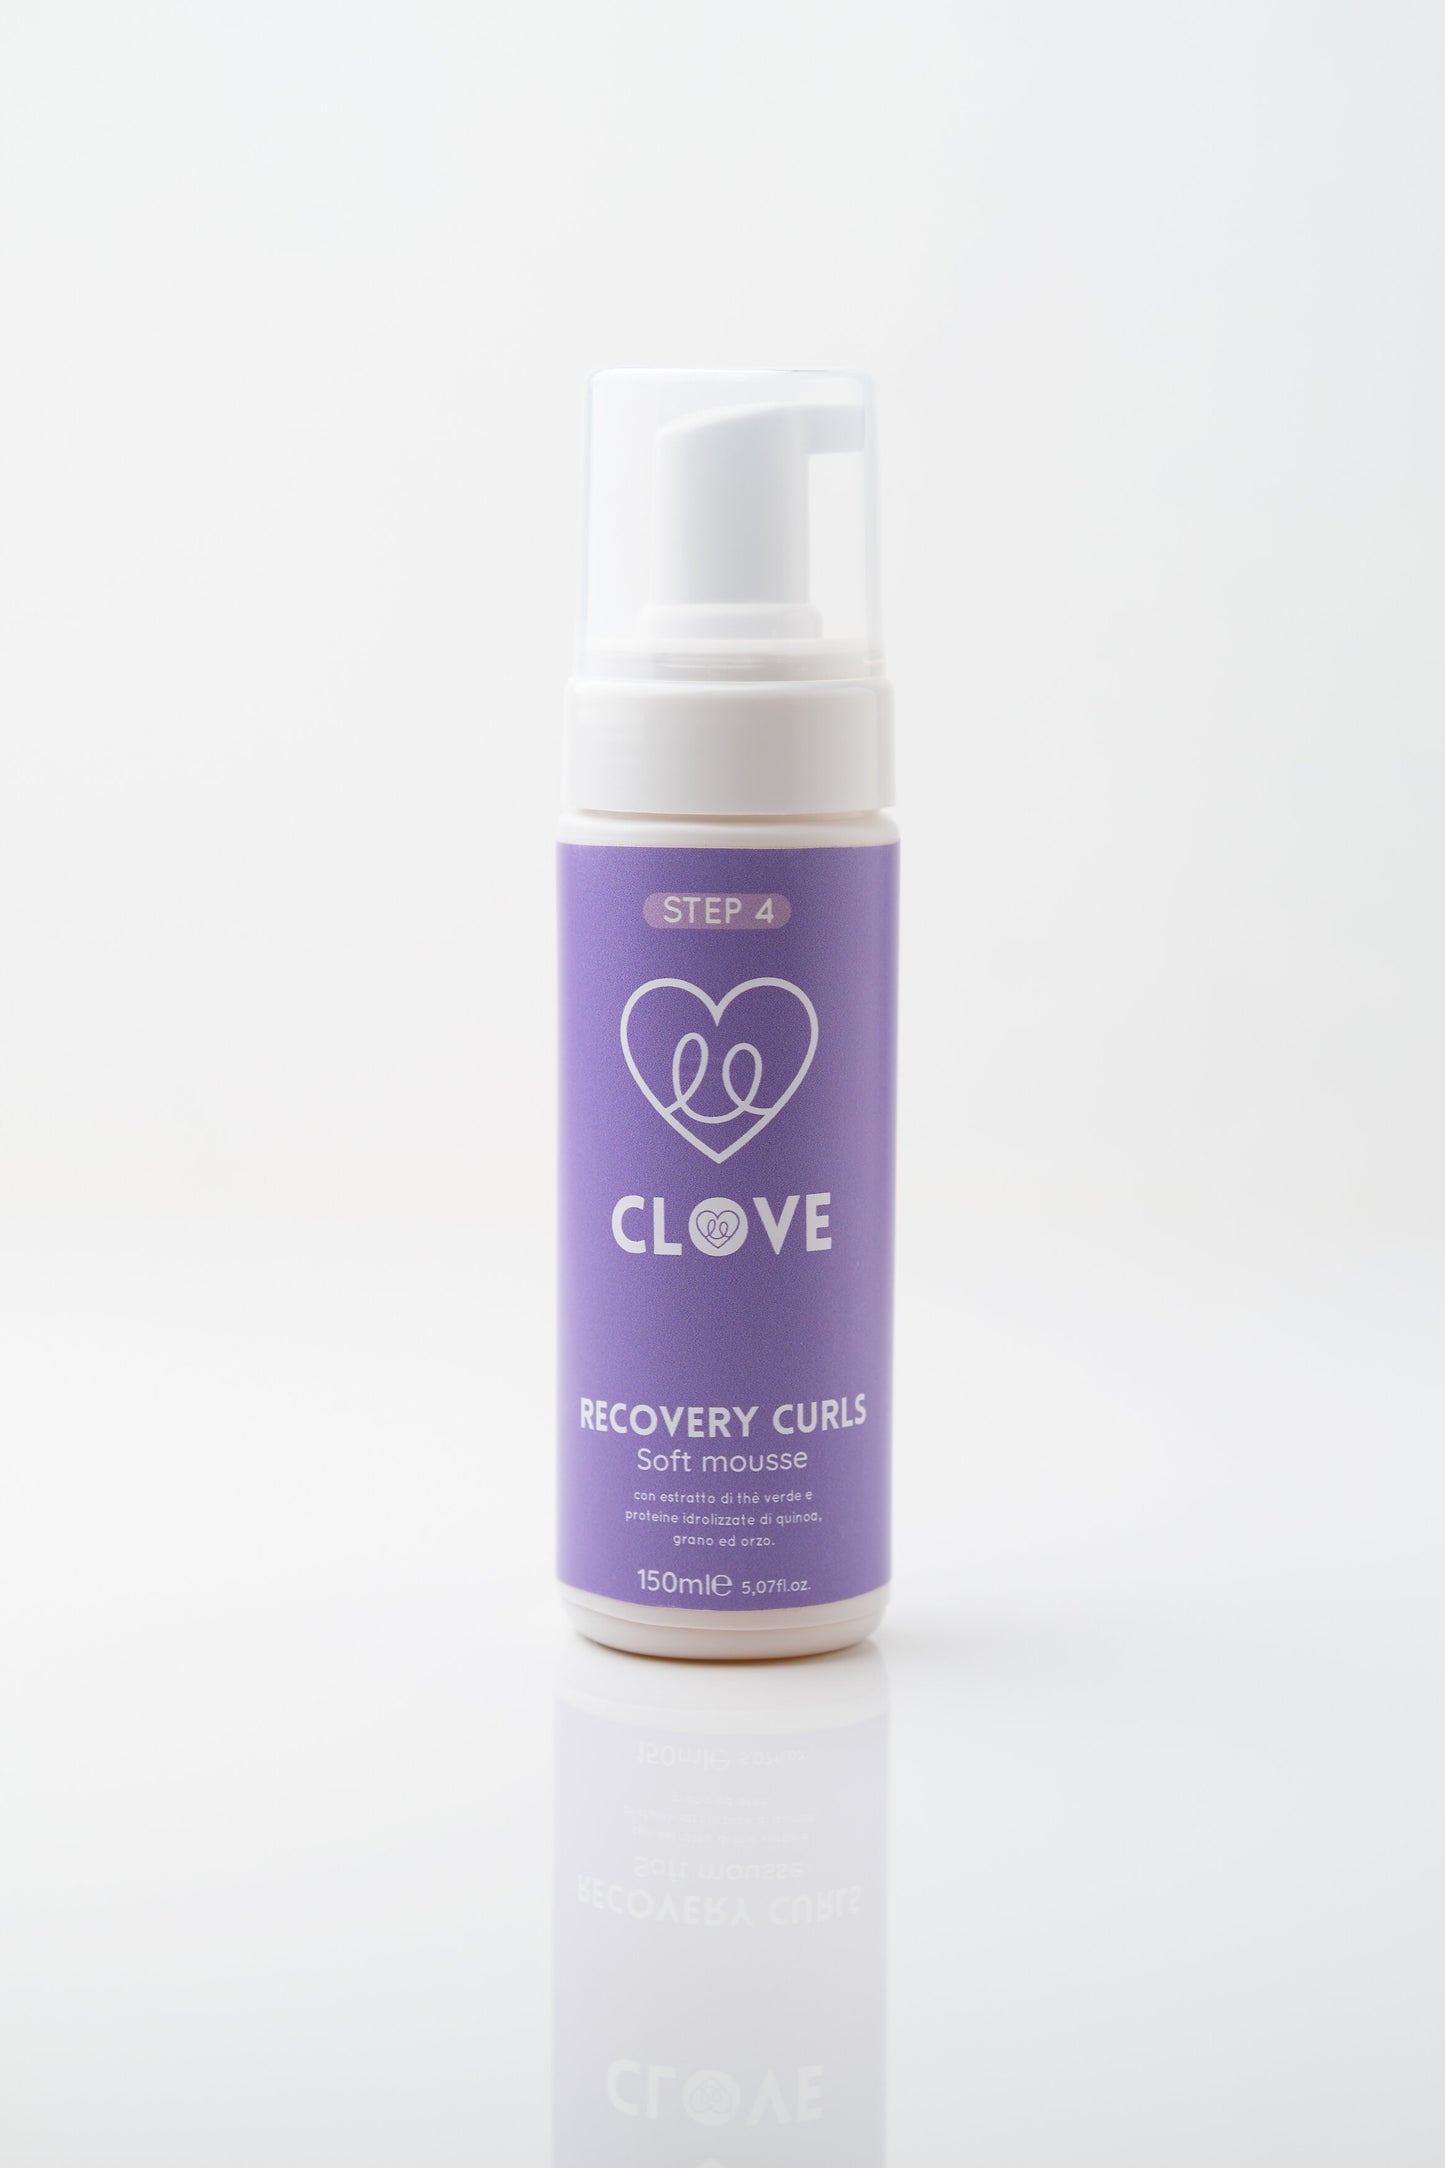 Soft mousse LINEA RECOVERY CURLS